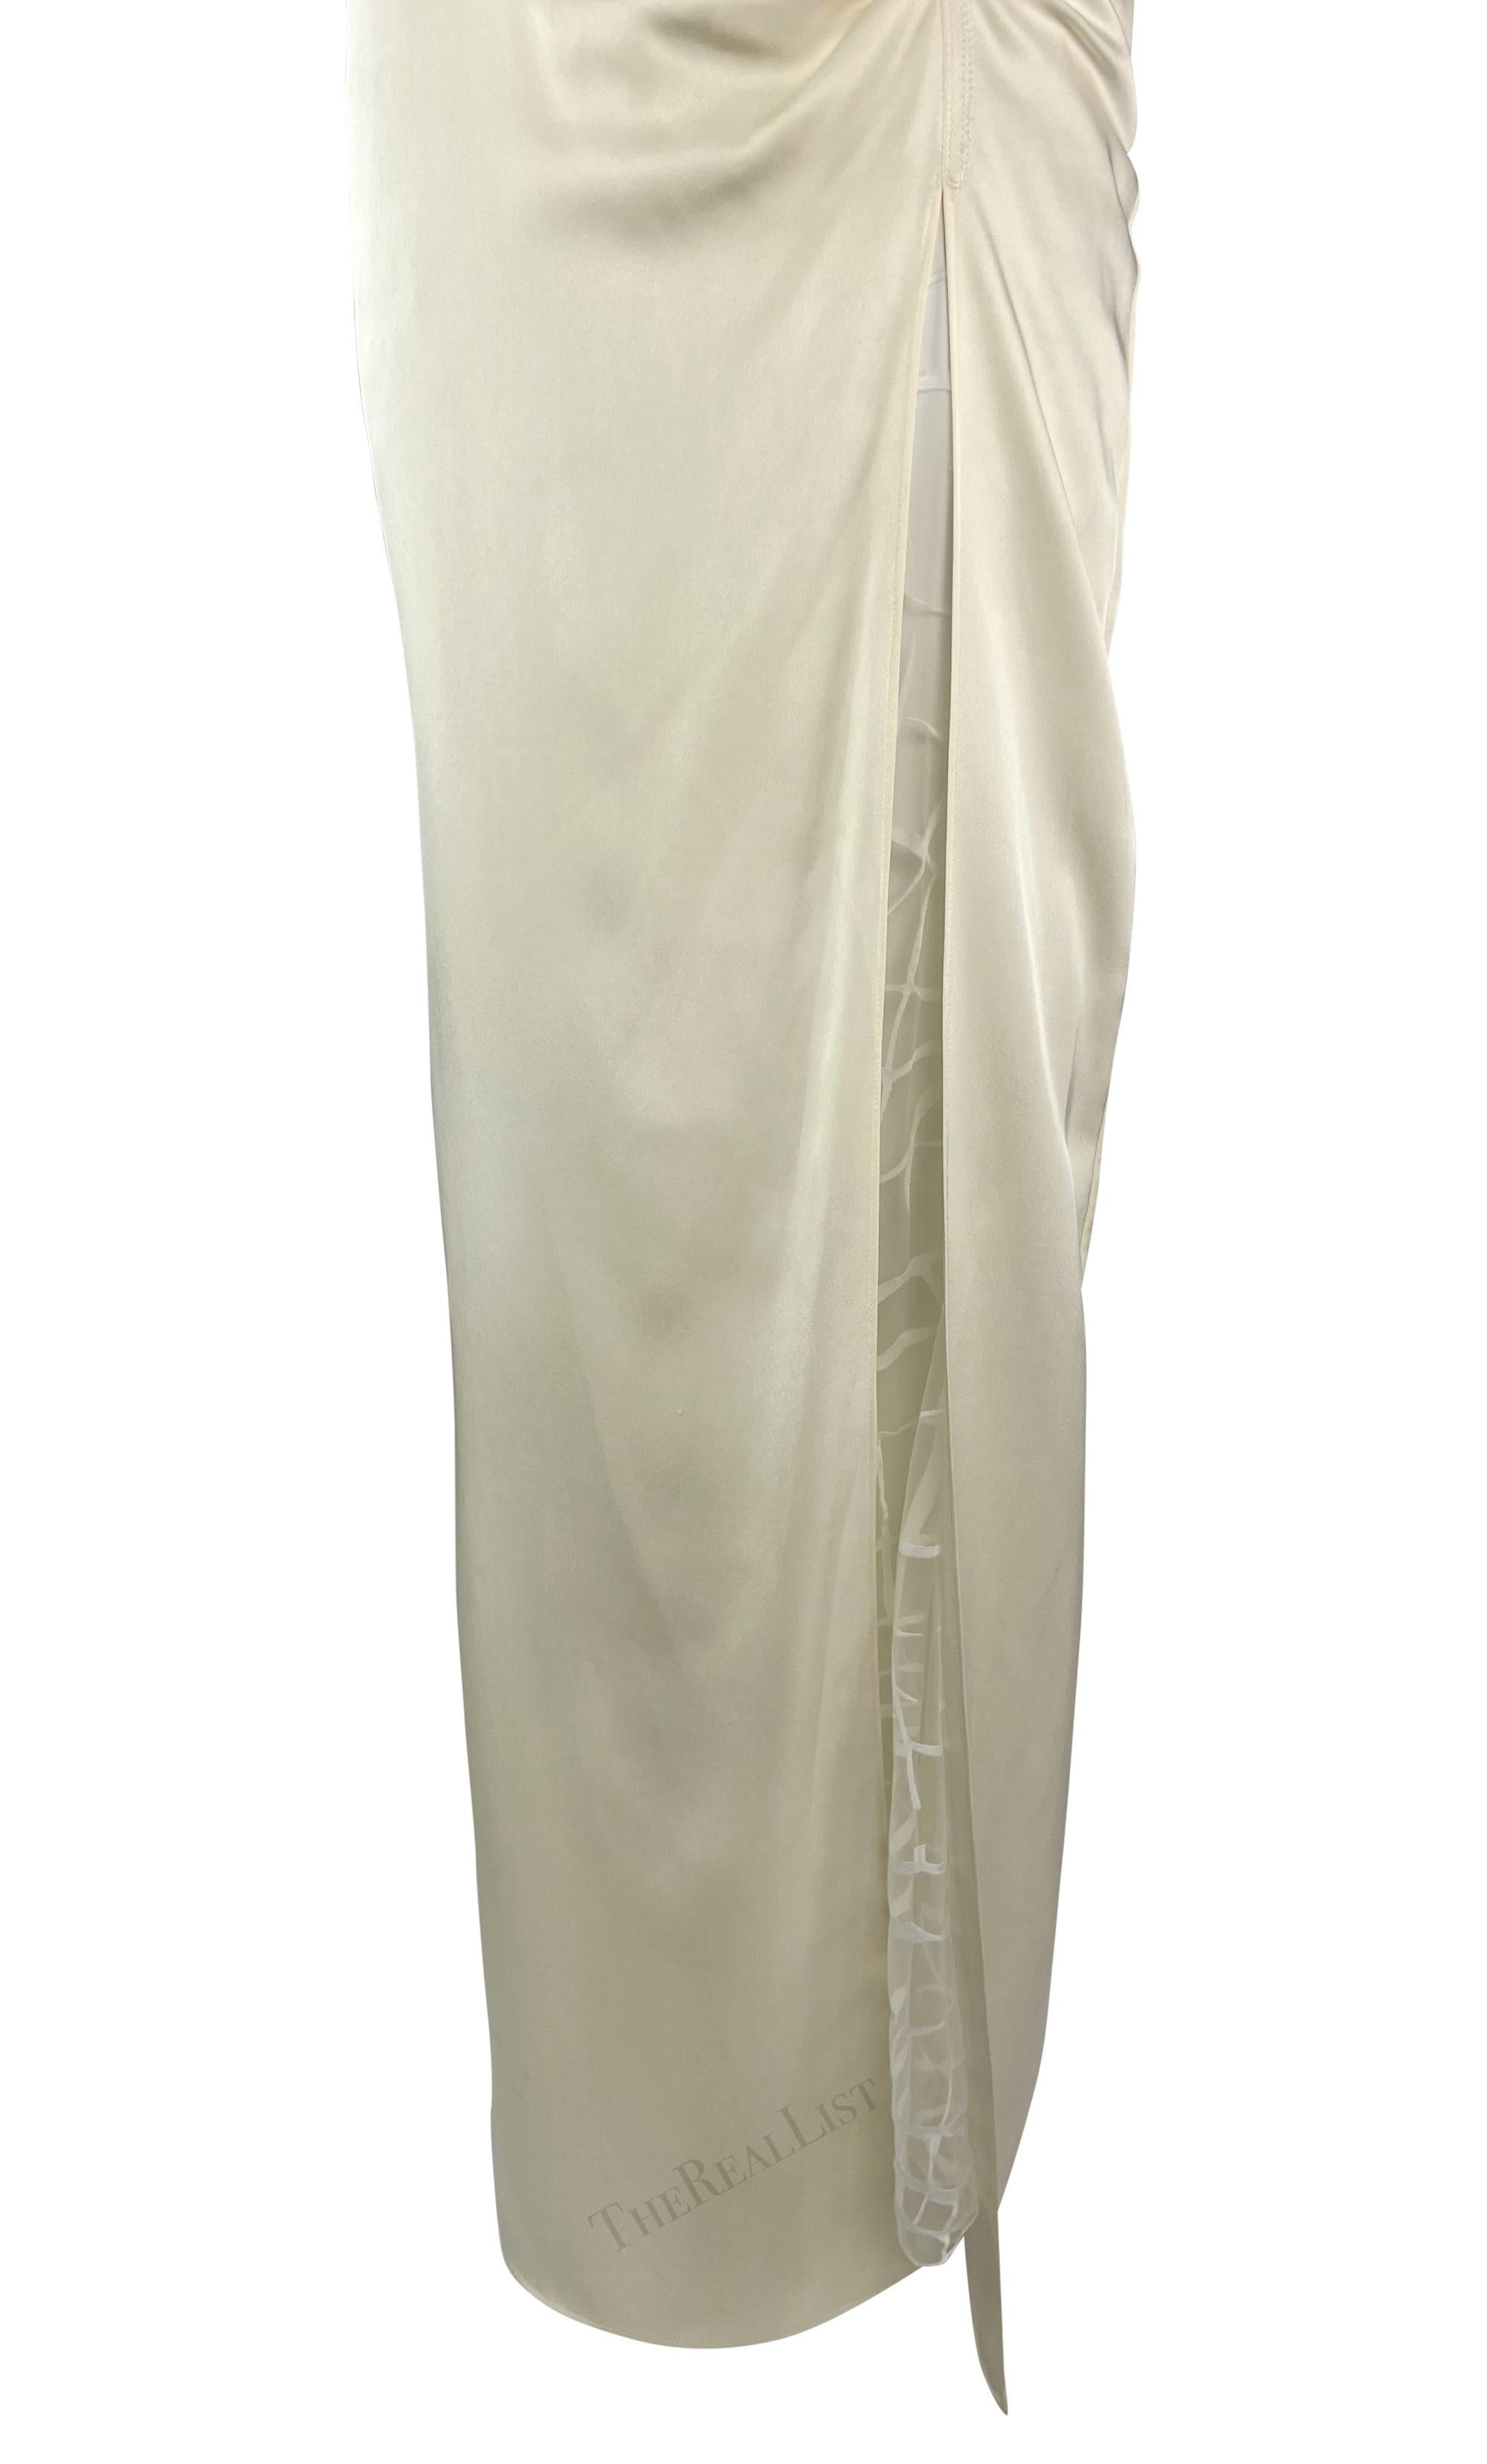 Women's S/S 1999 Gianni Versace by Donatella Ruched Off-White High-Slit Backless Gown